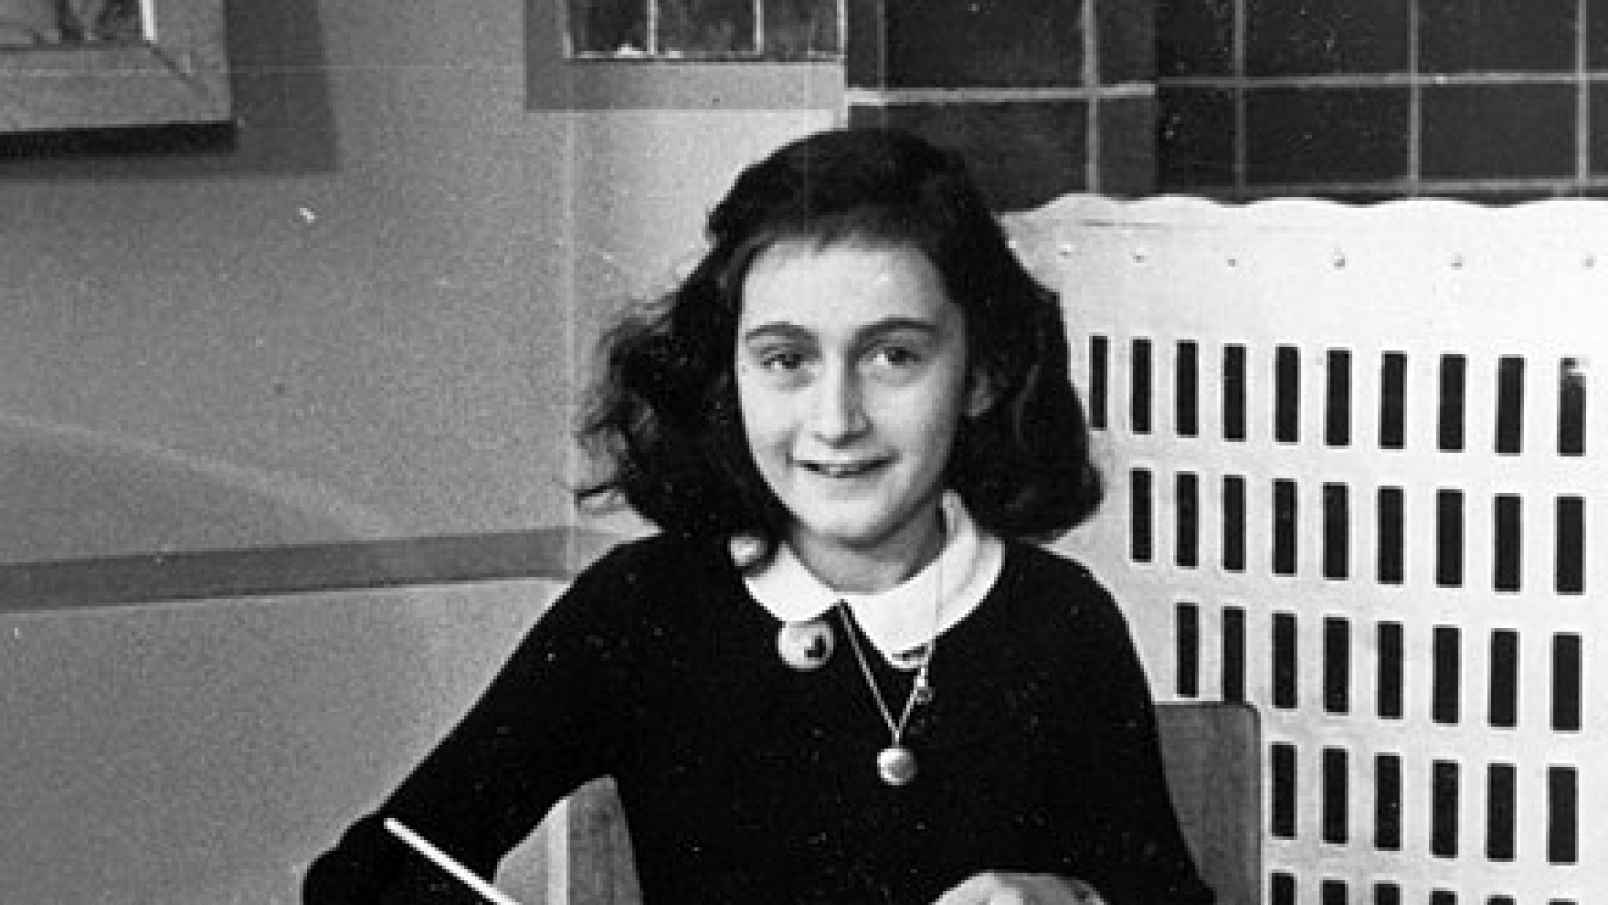 New Anne Frank plays casts ICE as the Nazis: Holocaust victim’s legacy ...